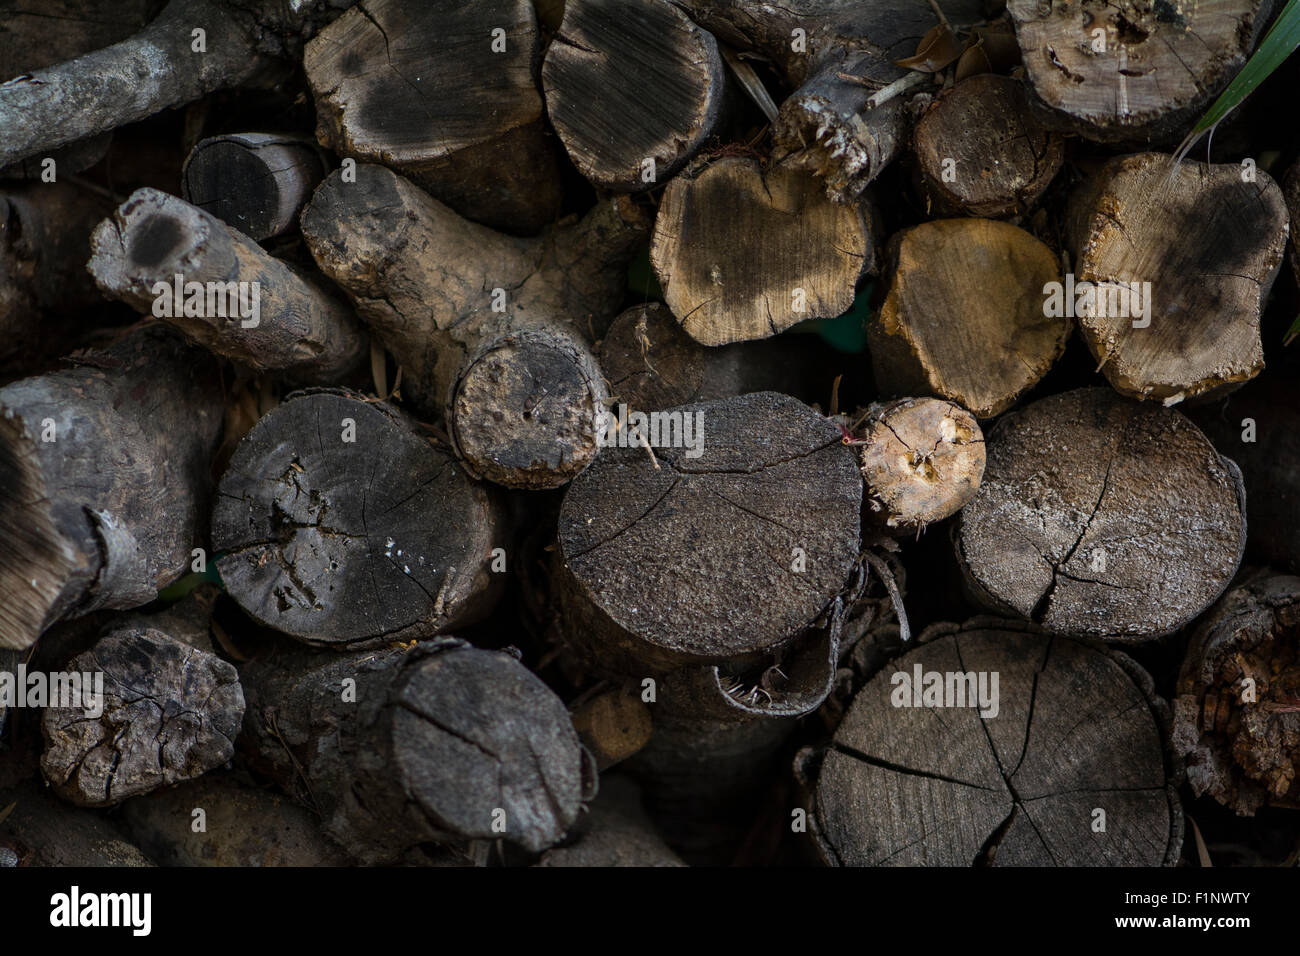 A pile of rotting firewood Stock Photo